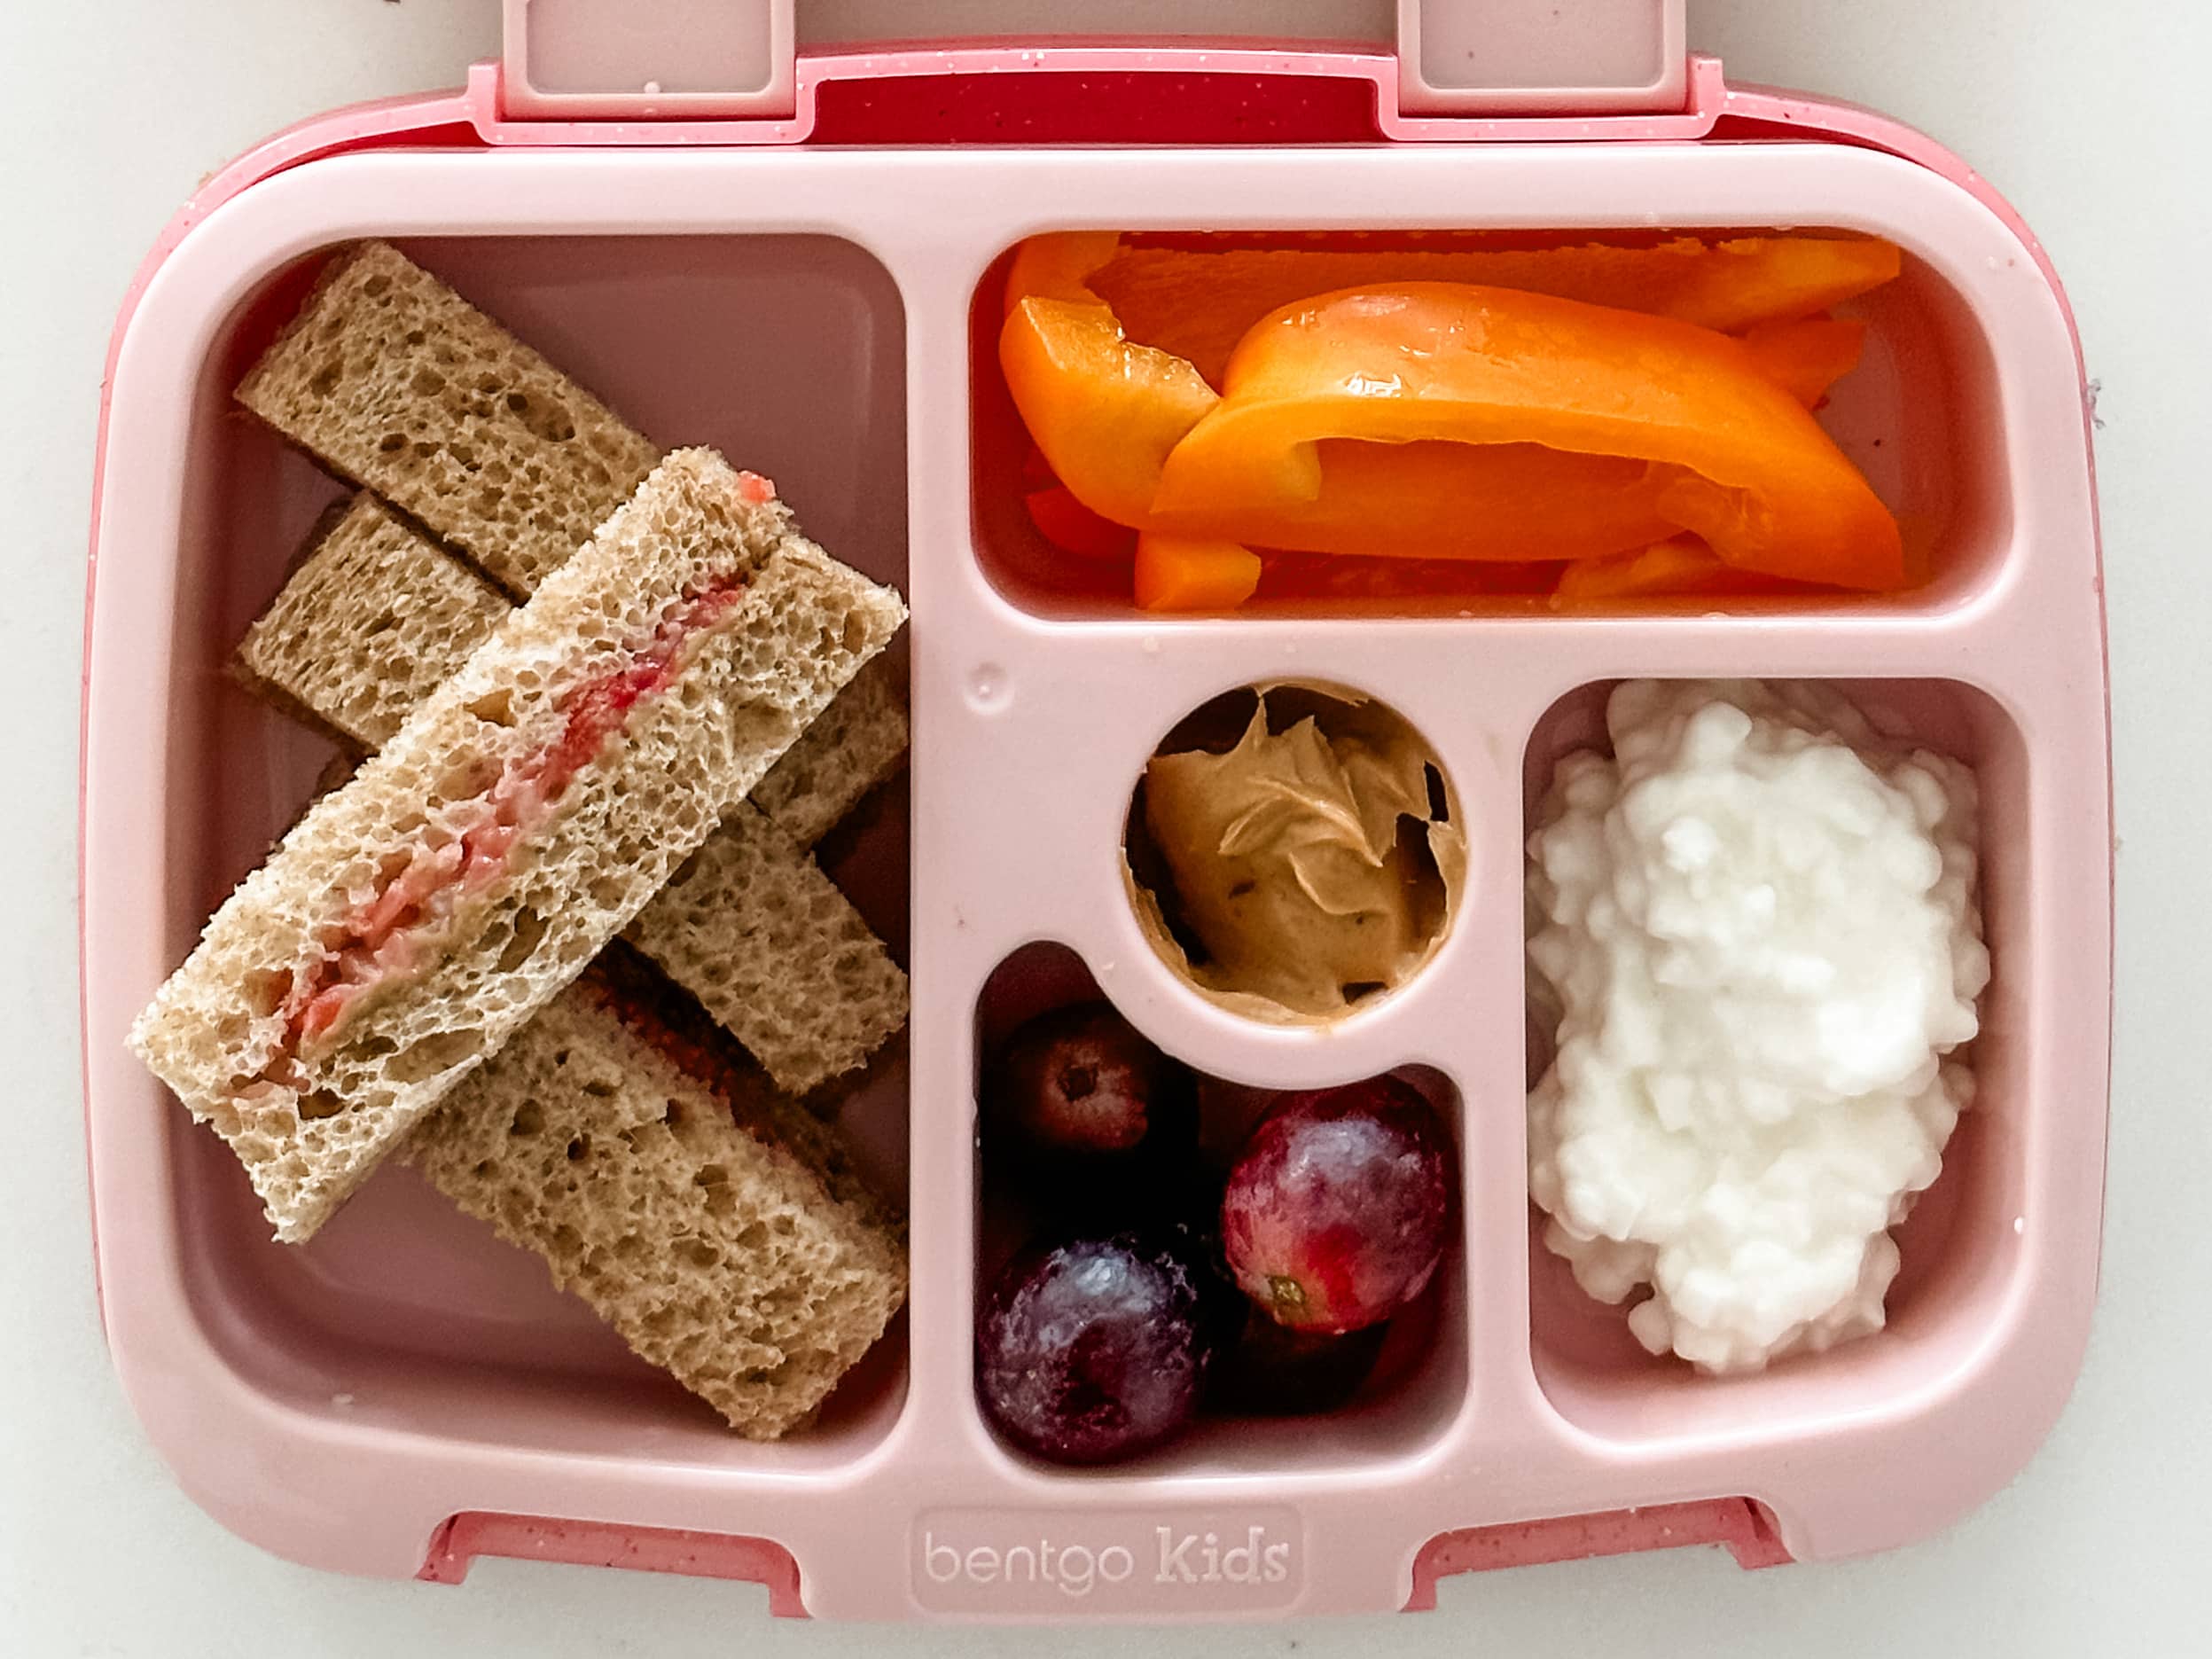 Kid's pink bento box with Sun Butter and Fruit Sticks with cottage cheese, bell peppers, grapes and peanut butter